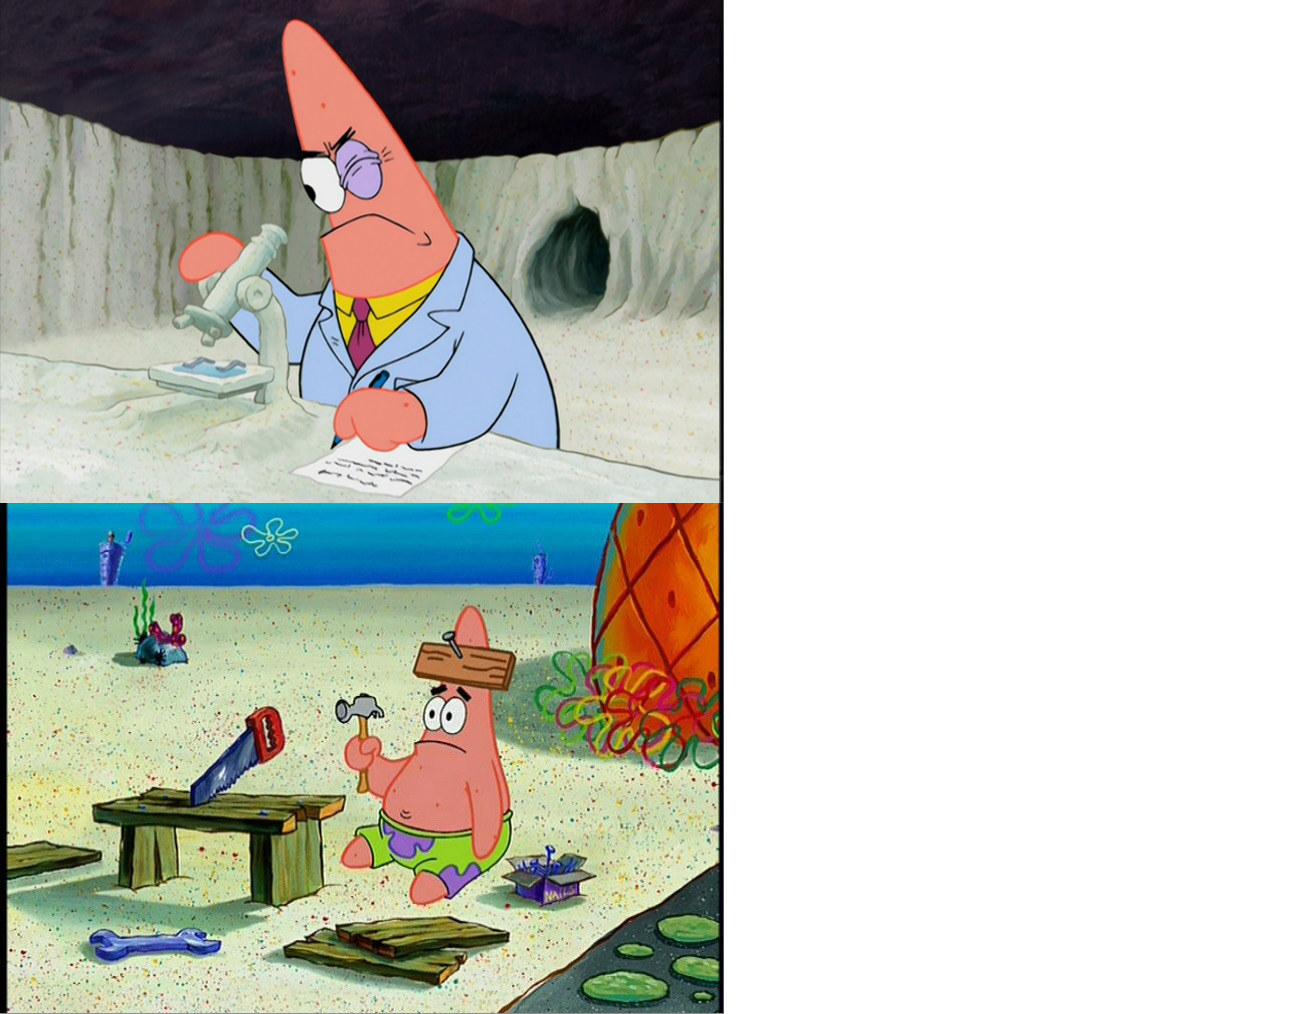 patrick-star-scientist-meme-template-when-you-realize-that-science-fact-trumps-science-fiction